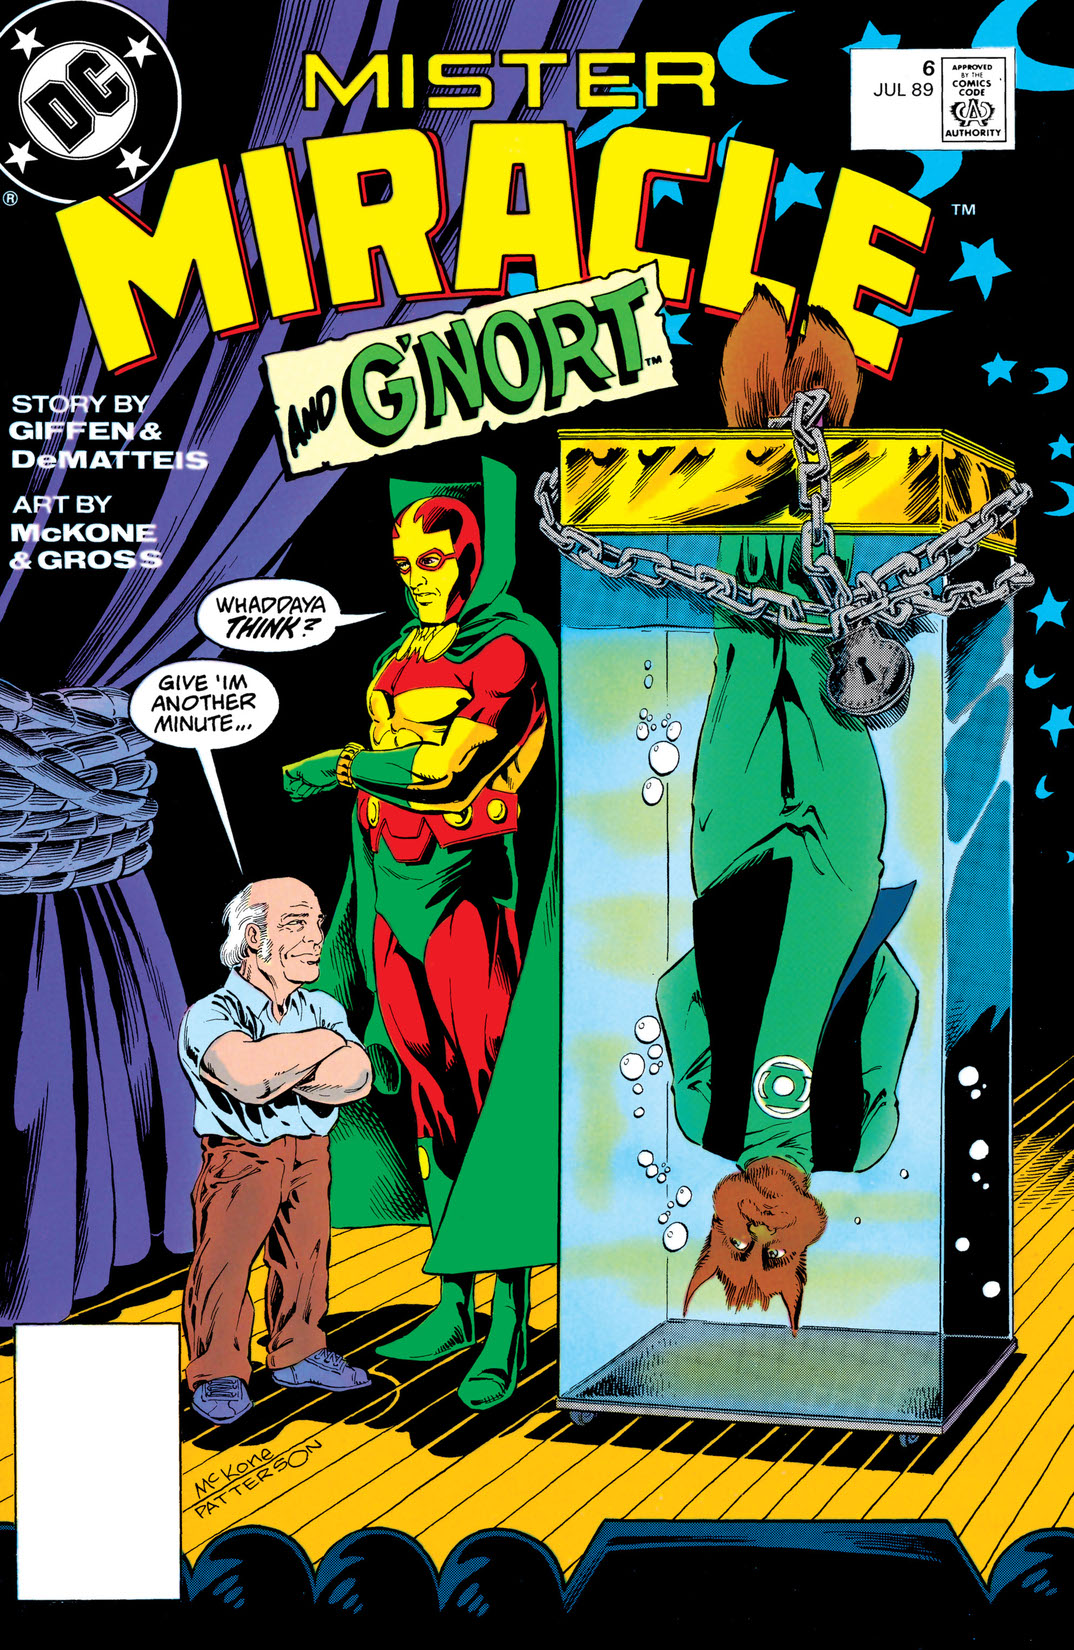 Mister Miracle (1988-) #6 preview images